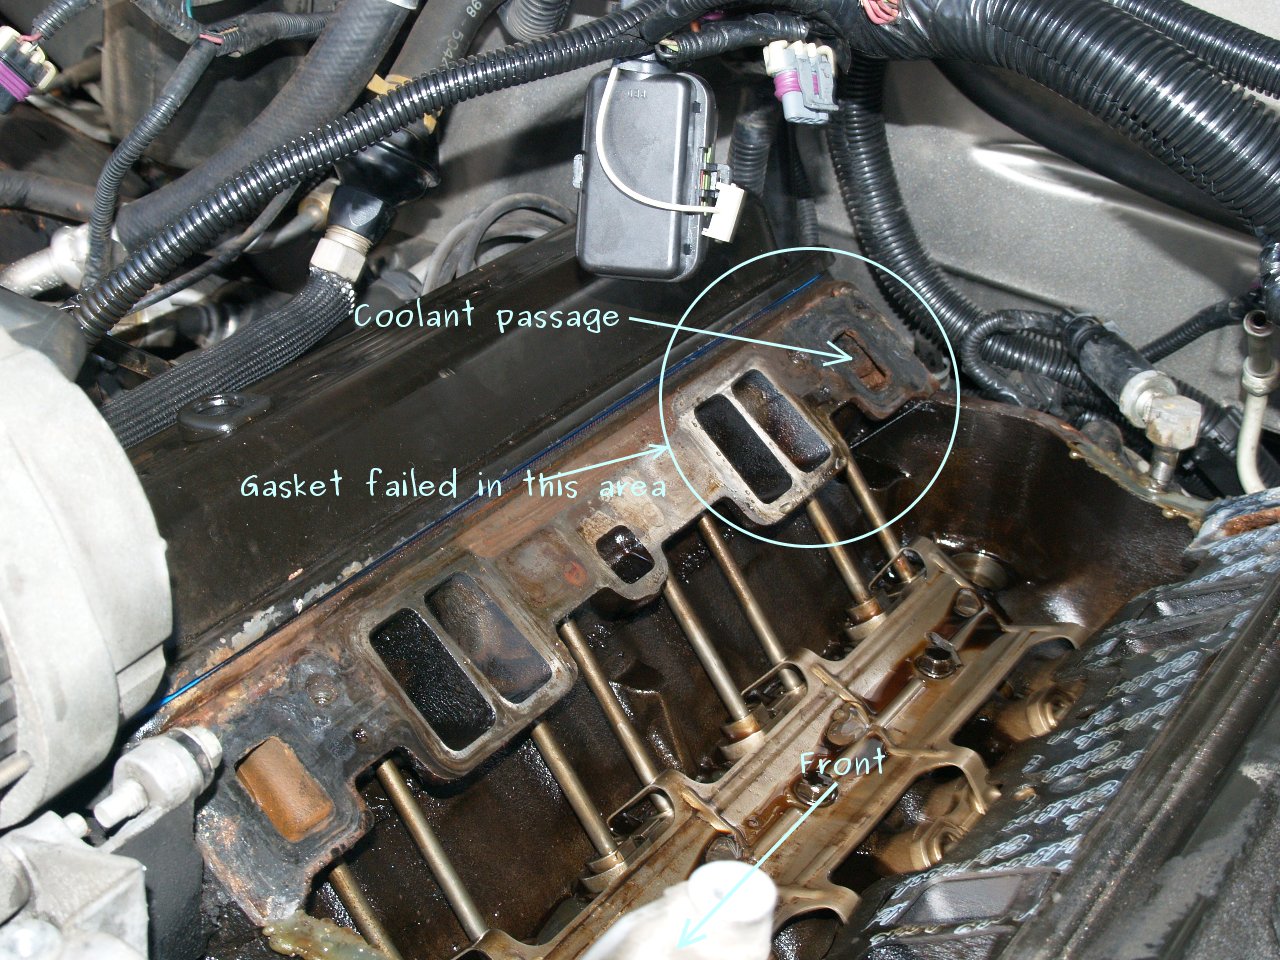 See P234F in engine